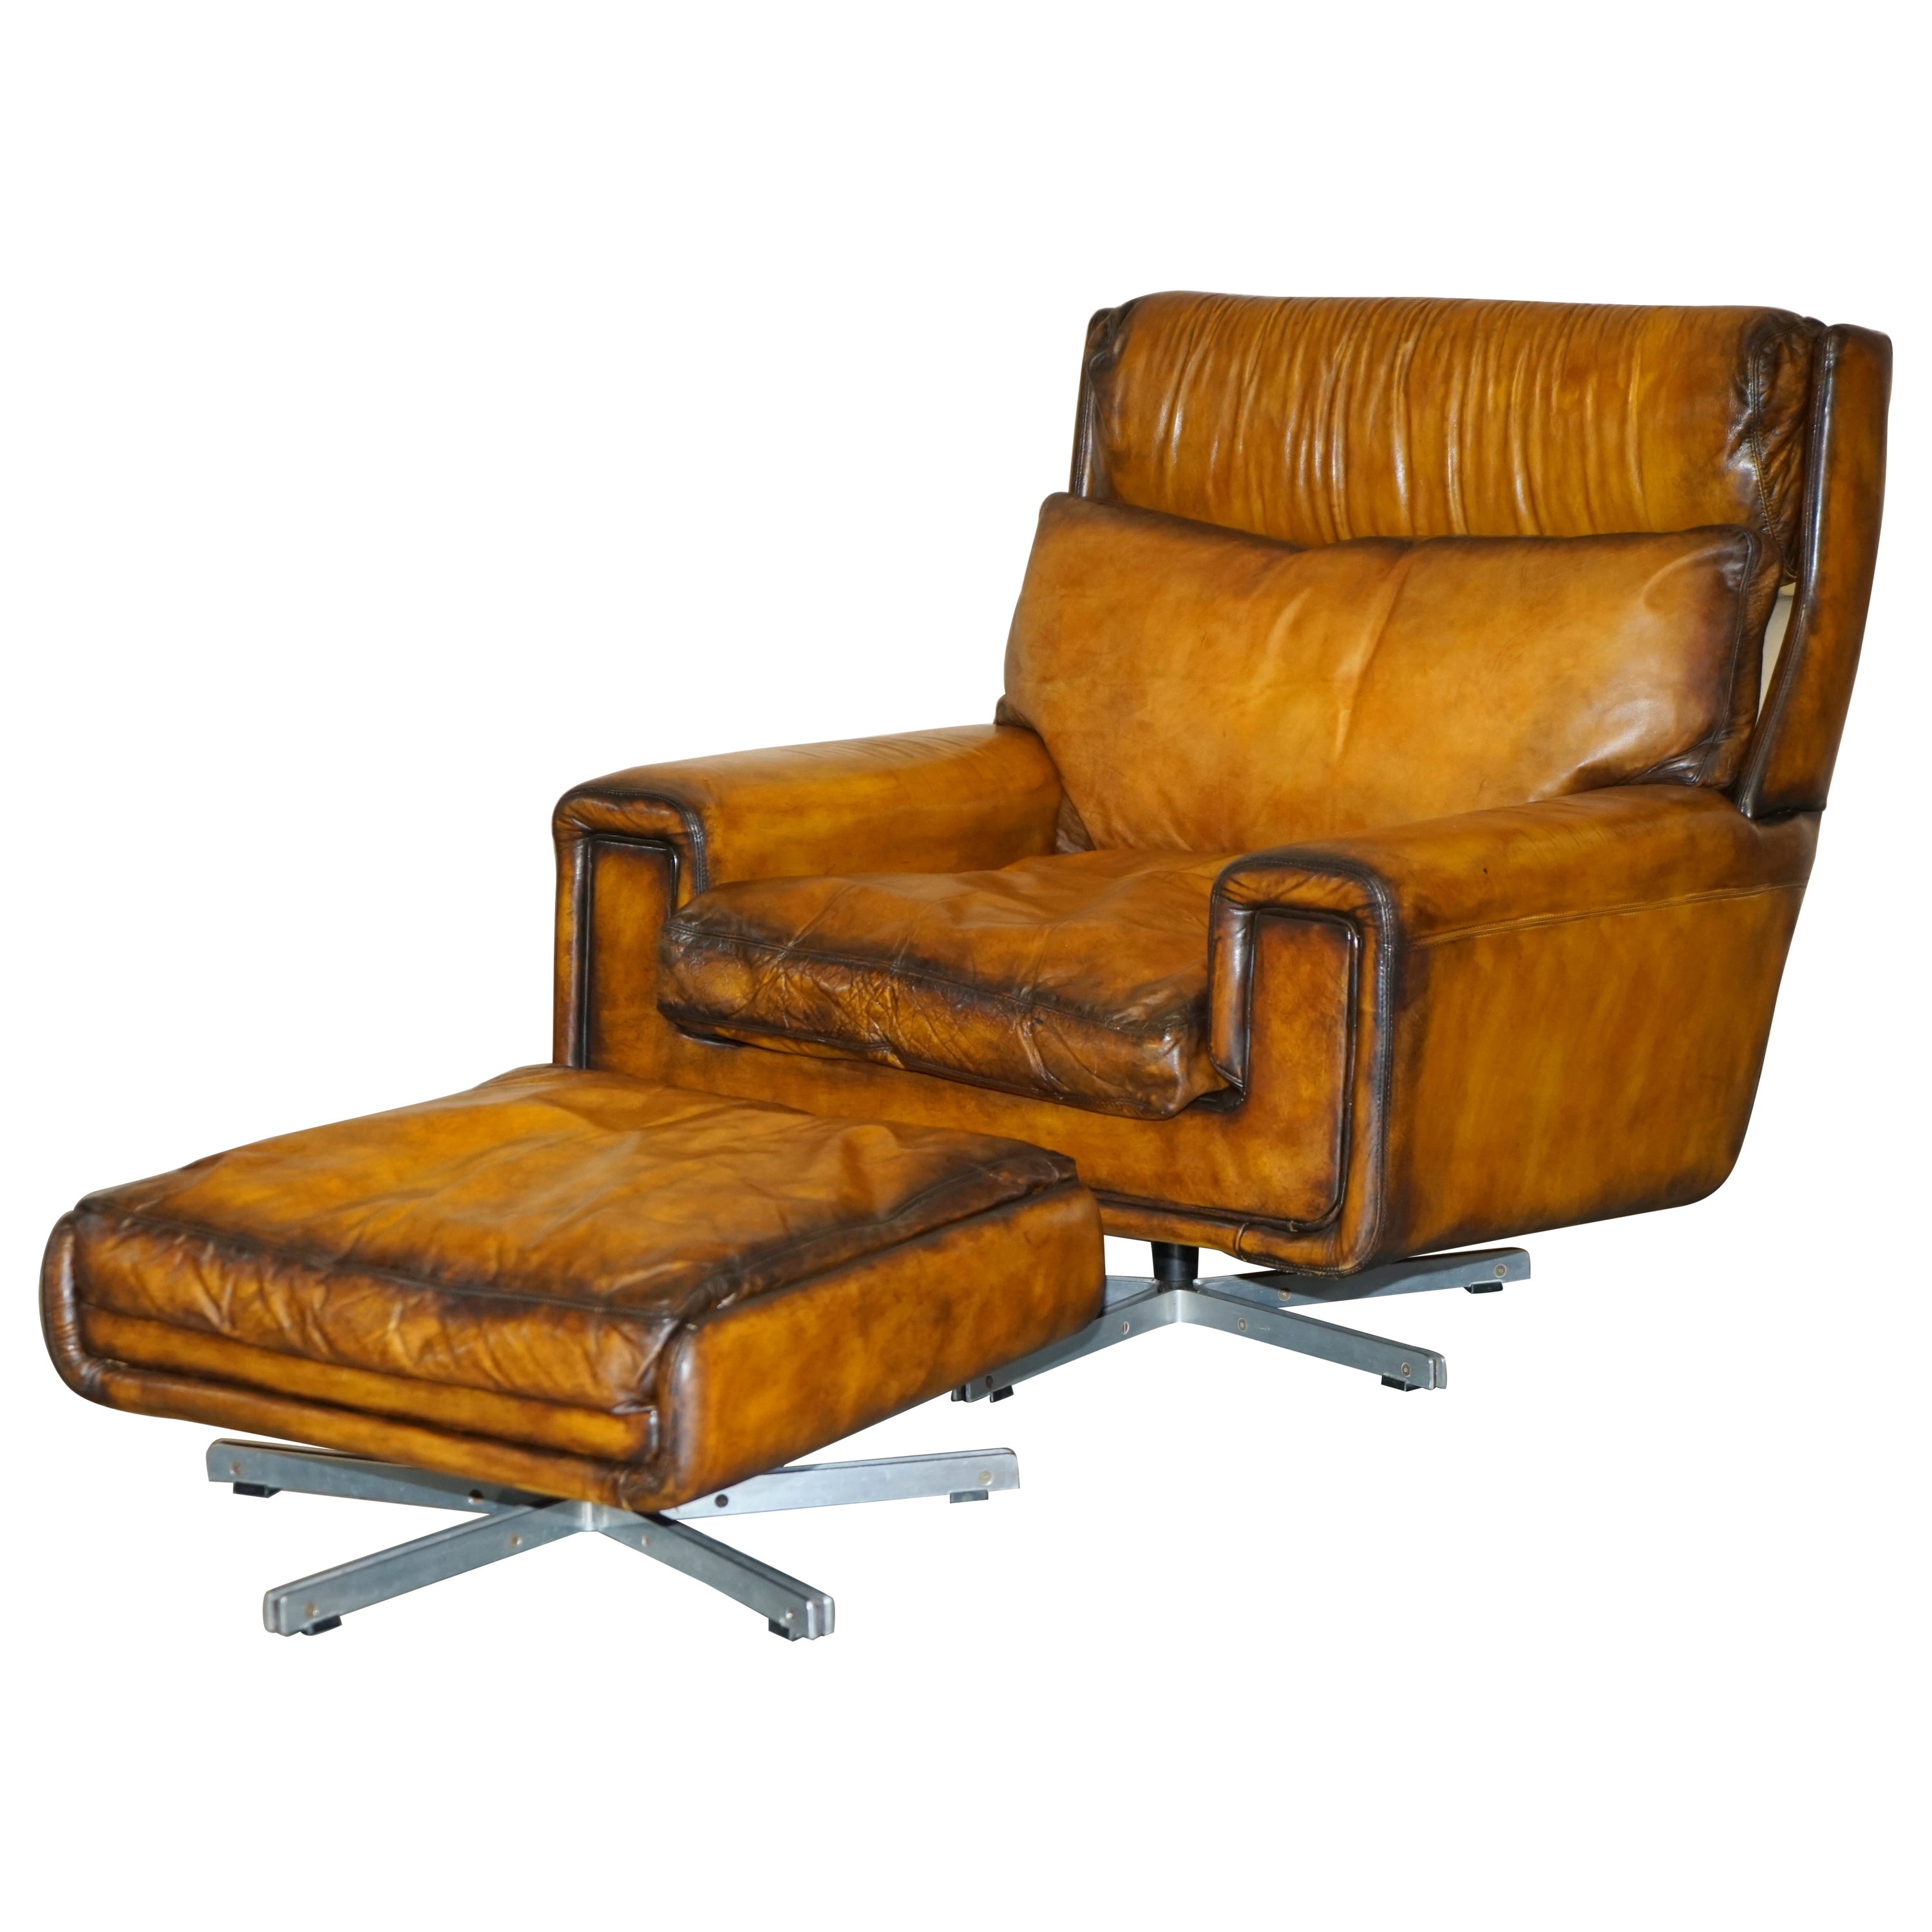 Restored 1970s Whisky Brown Leather Swivel Lounge Armchair & Ottoman Part Set For Sale